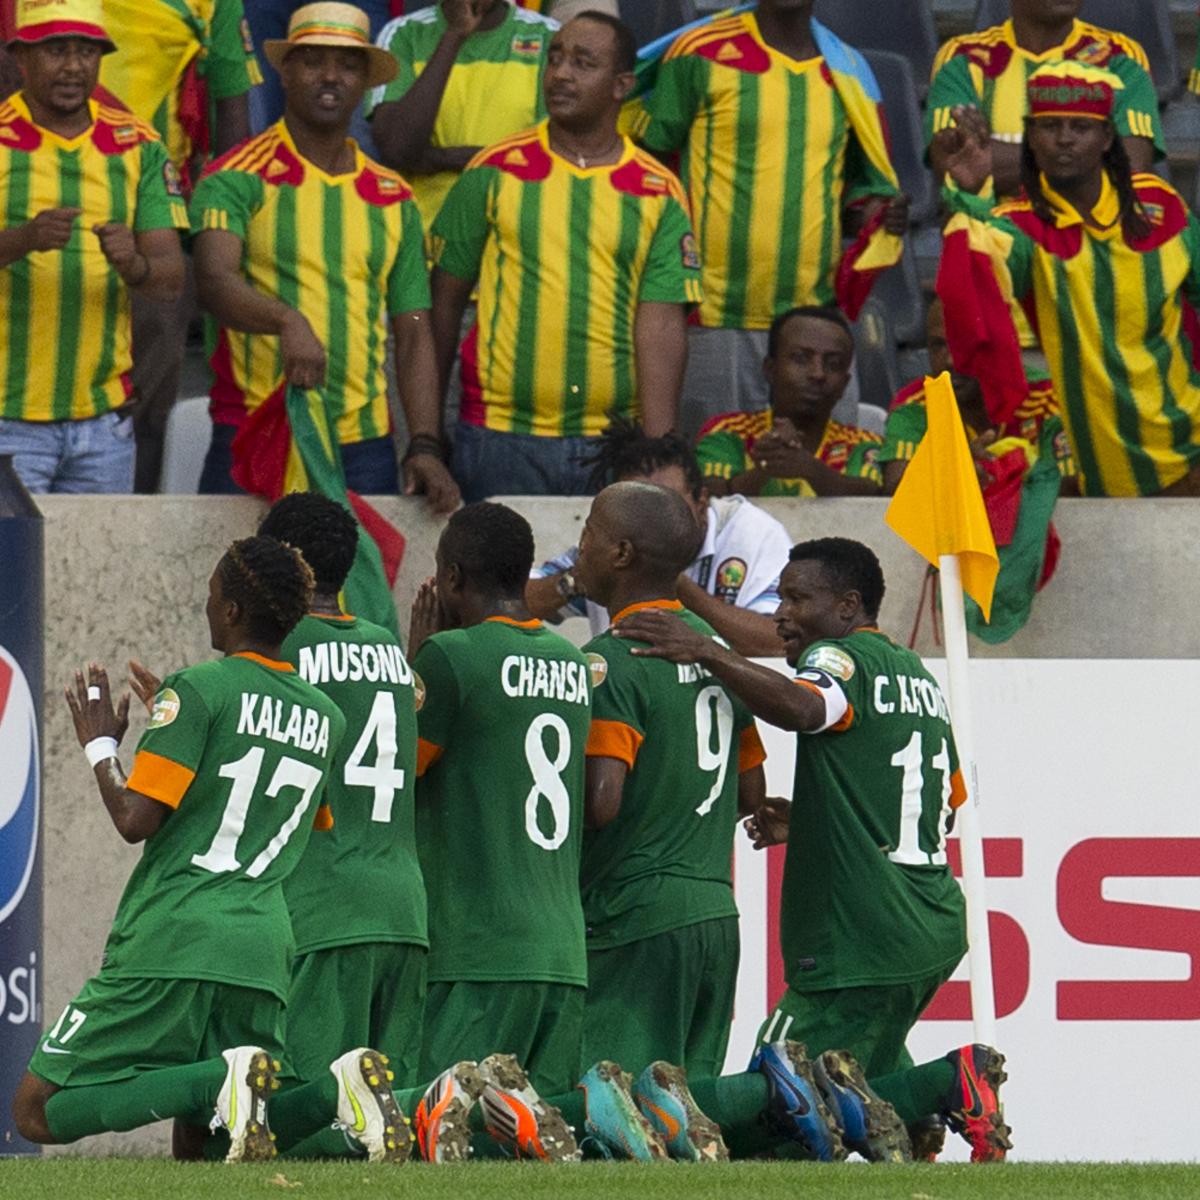 Africa Cup of Nations 2013 TV Schedule: Day 7 Live Stream Info and